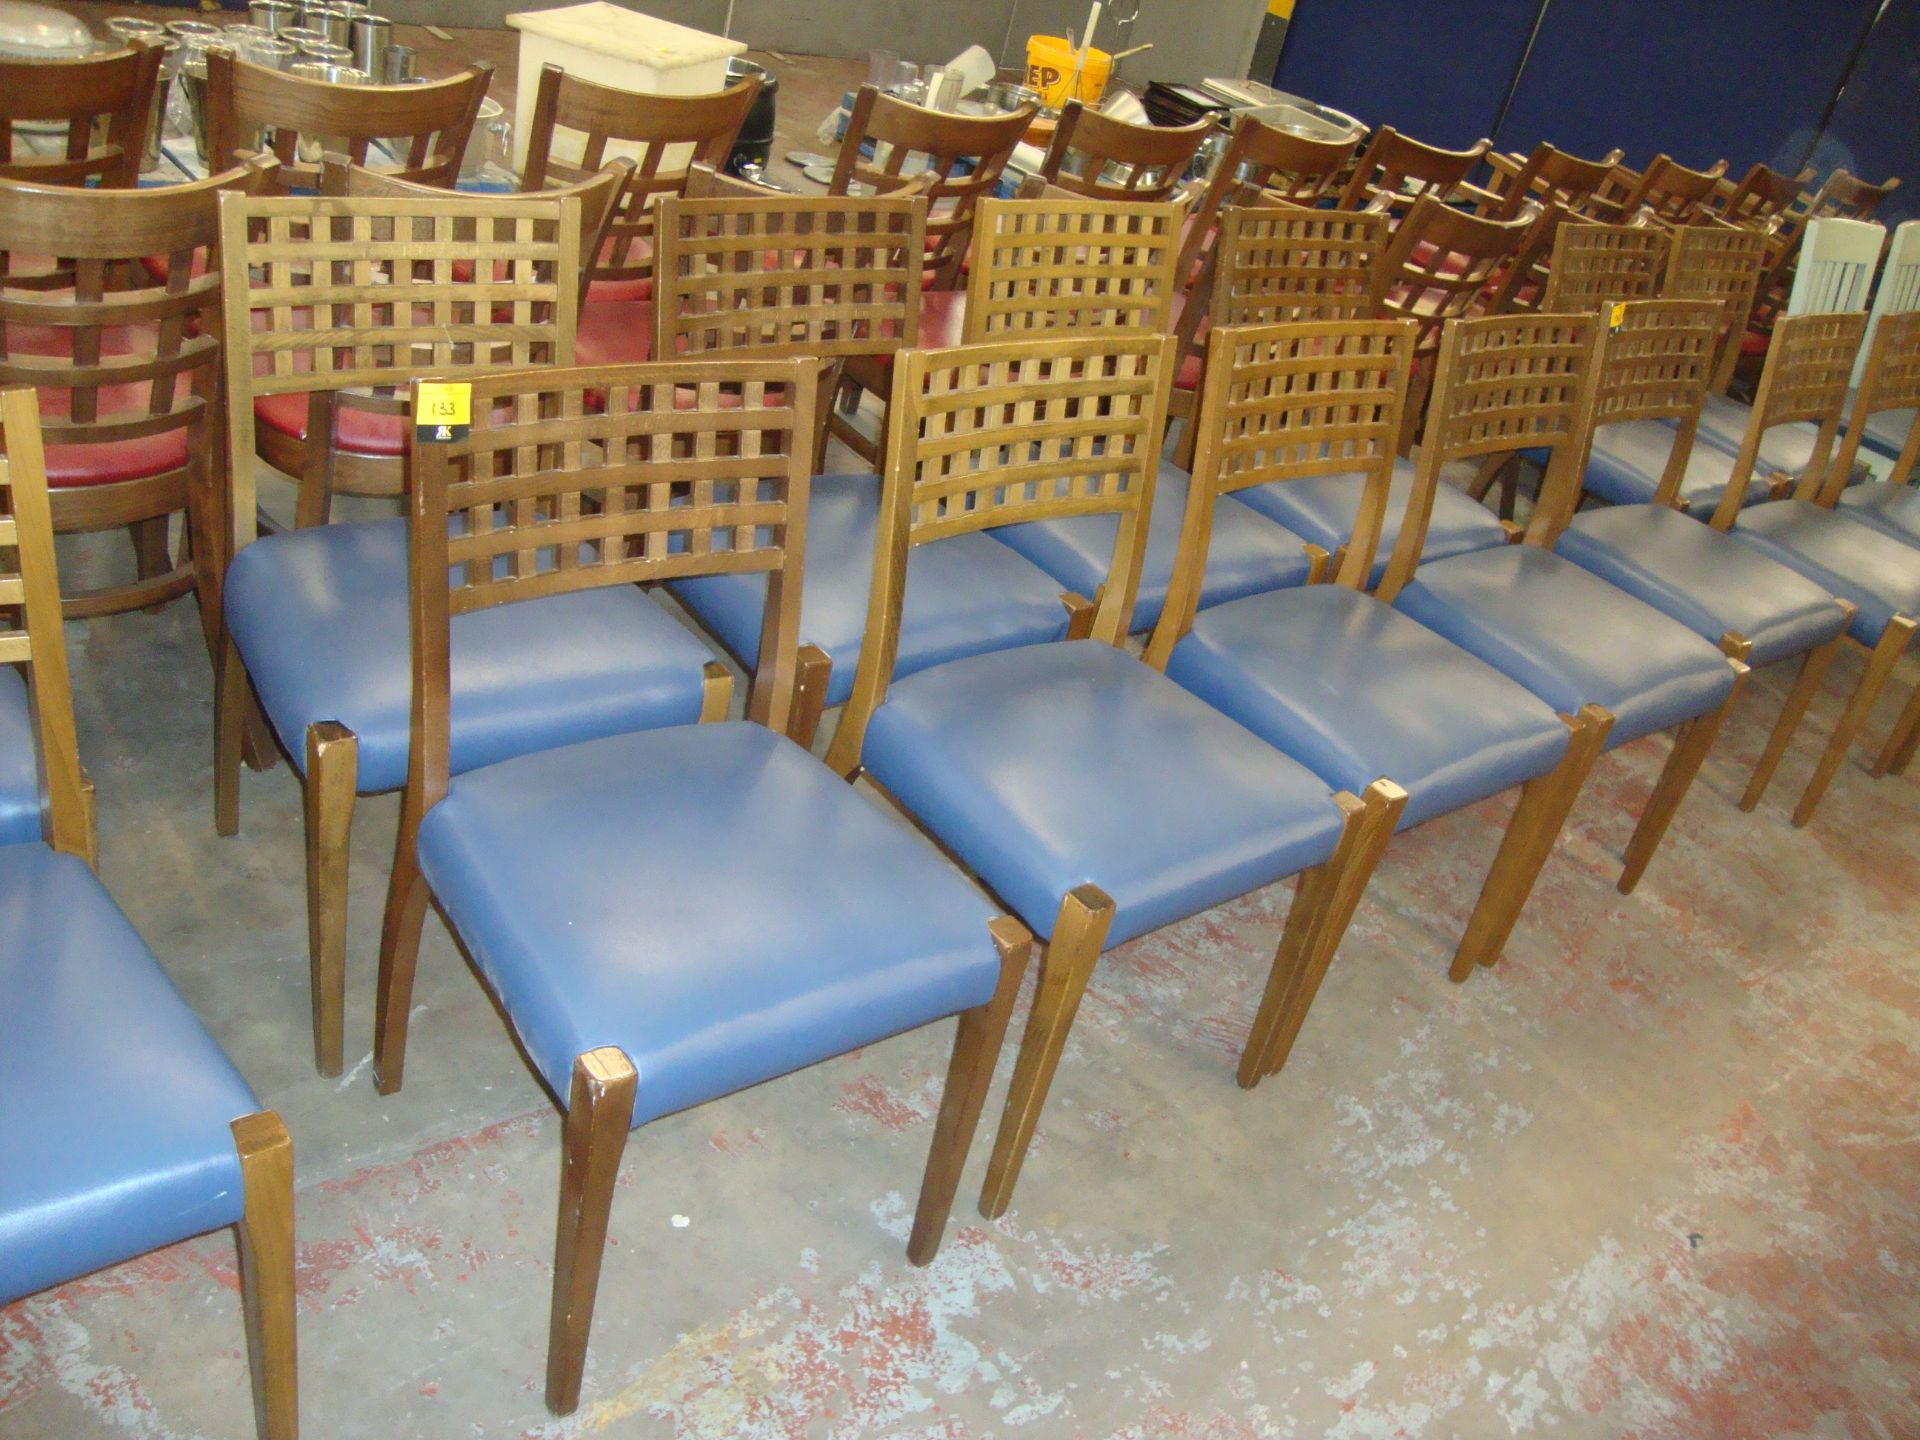 8 off matching wooden chairs with blue upholstered seat bases. NB lots 131 - 137 consist of chairs